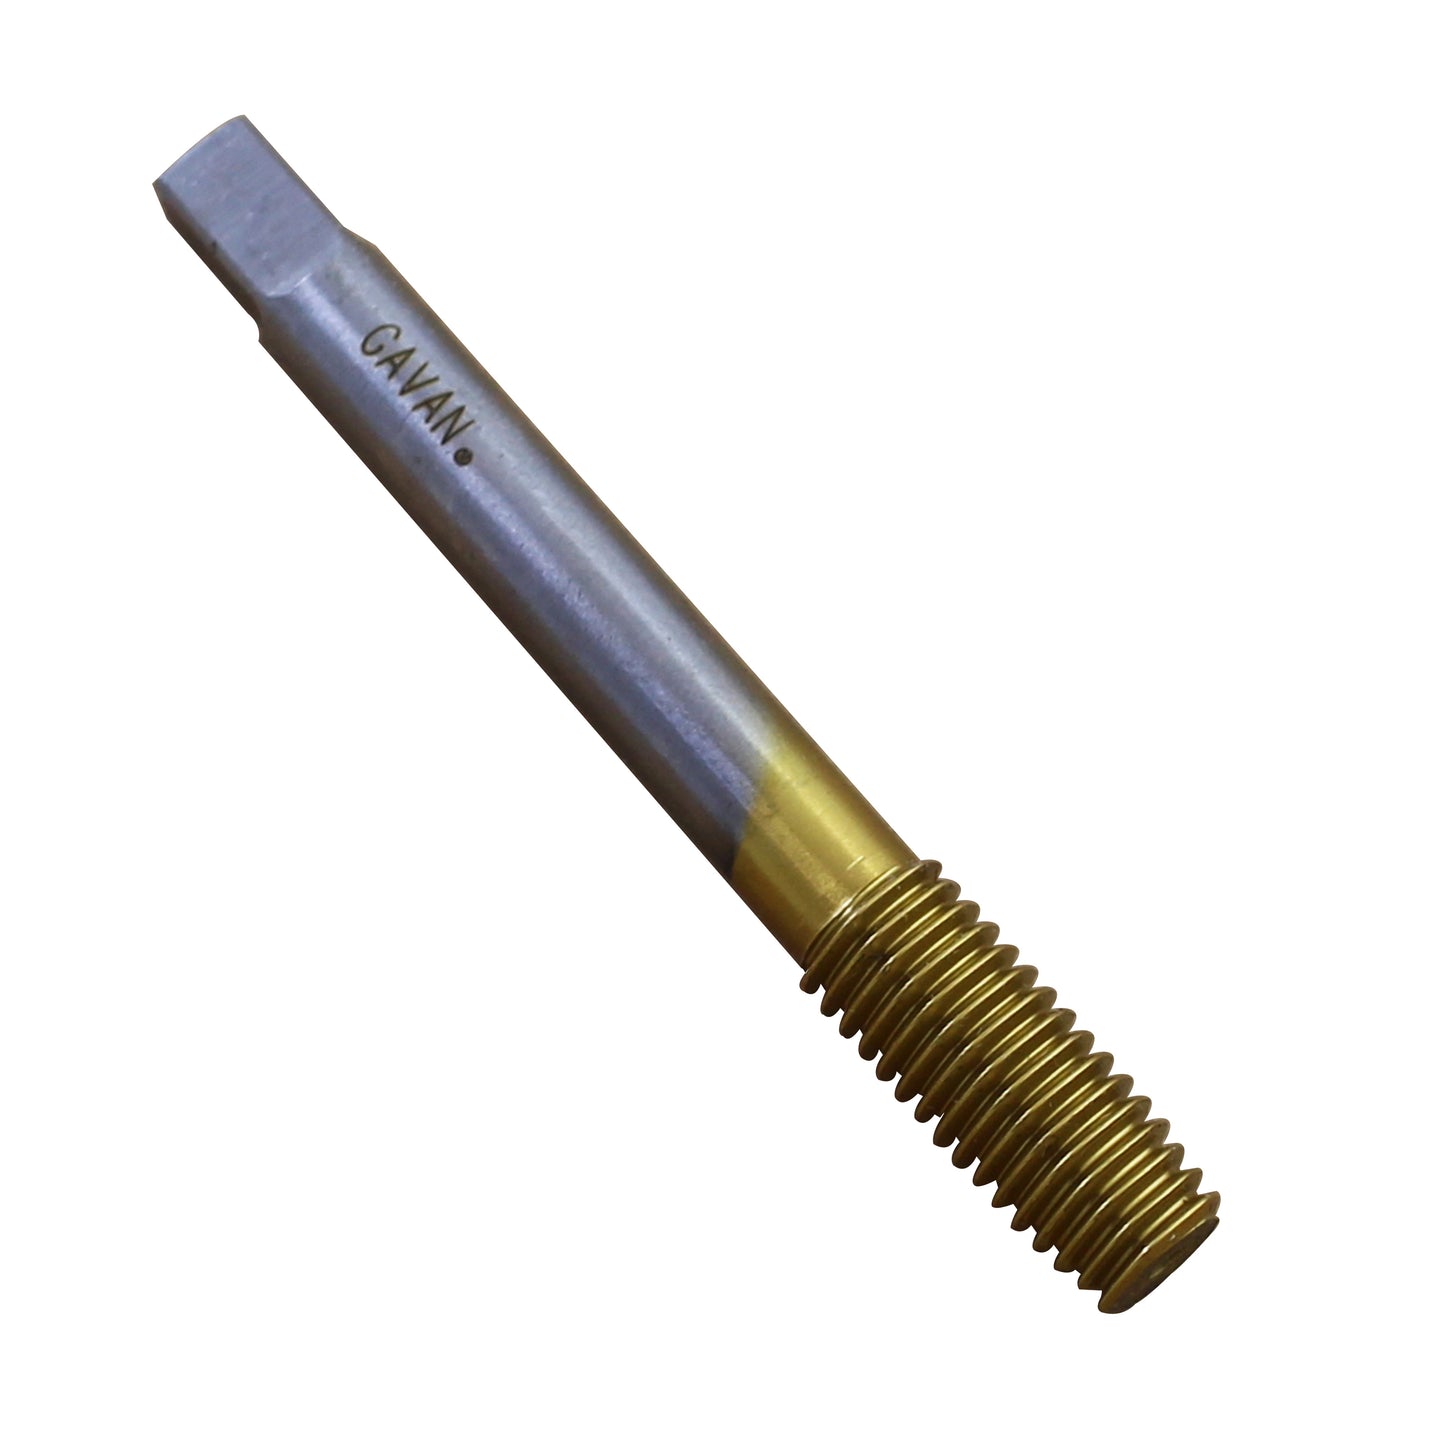 M7 x 0.75 HSS Left hand Thread Forming Tap